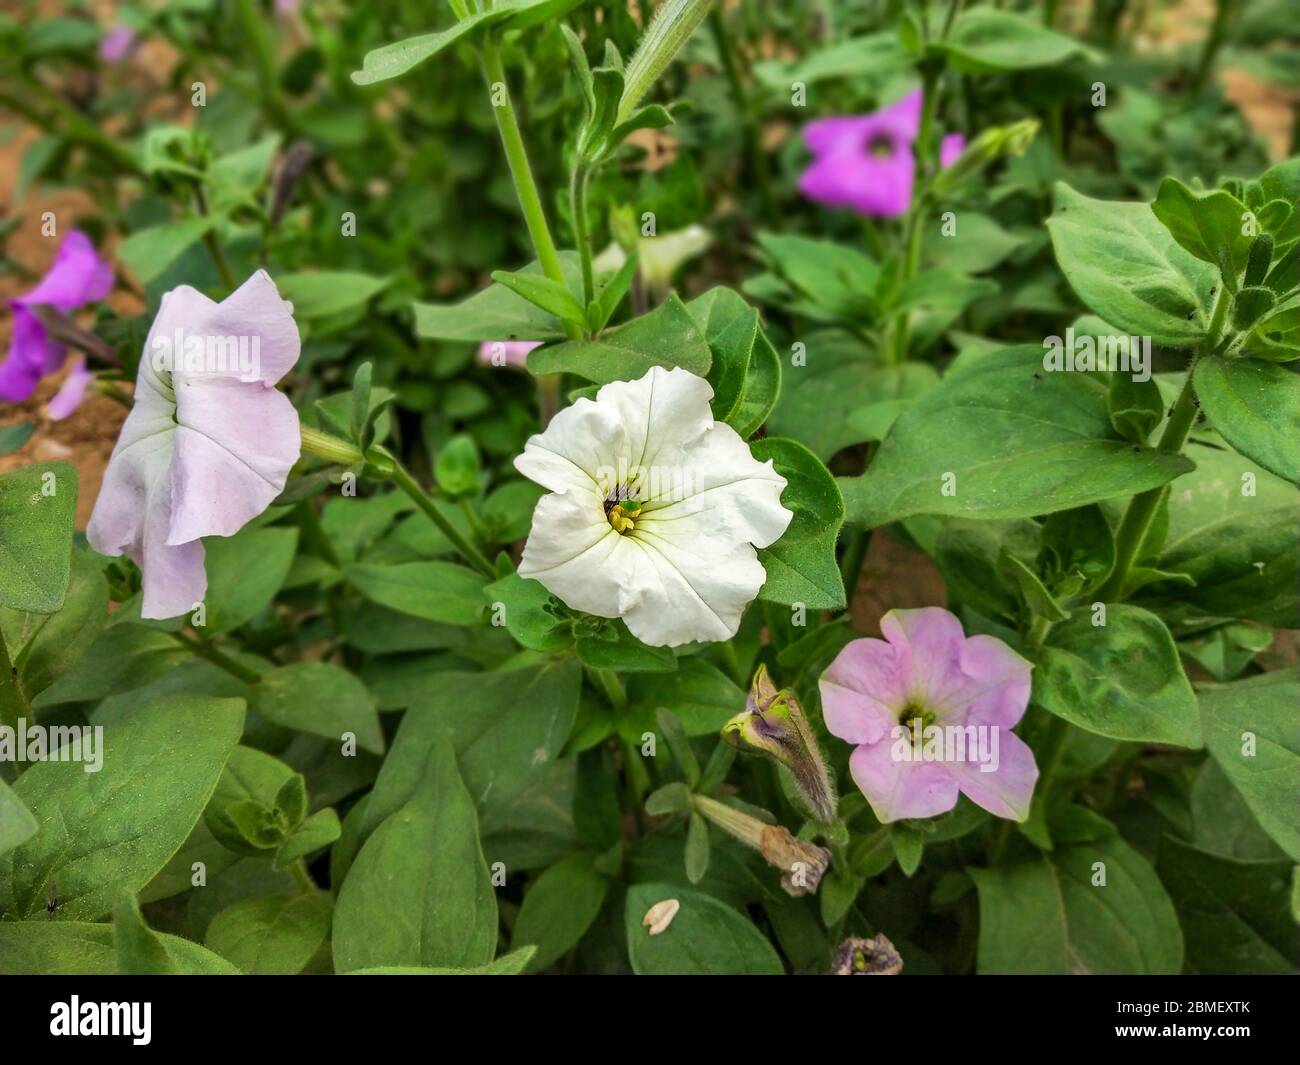 White and pink flower close-up shot with green leaves background Stock Photo